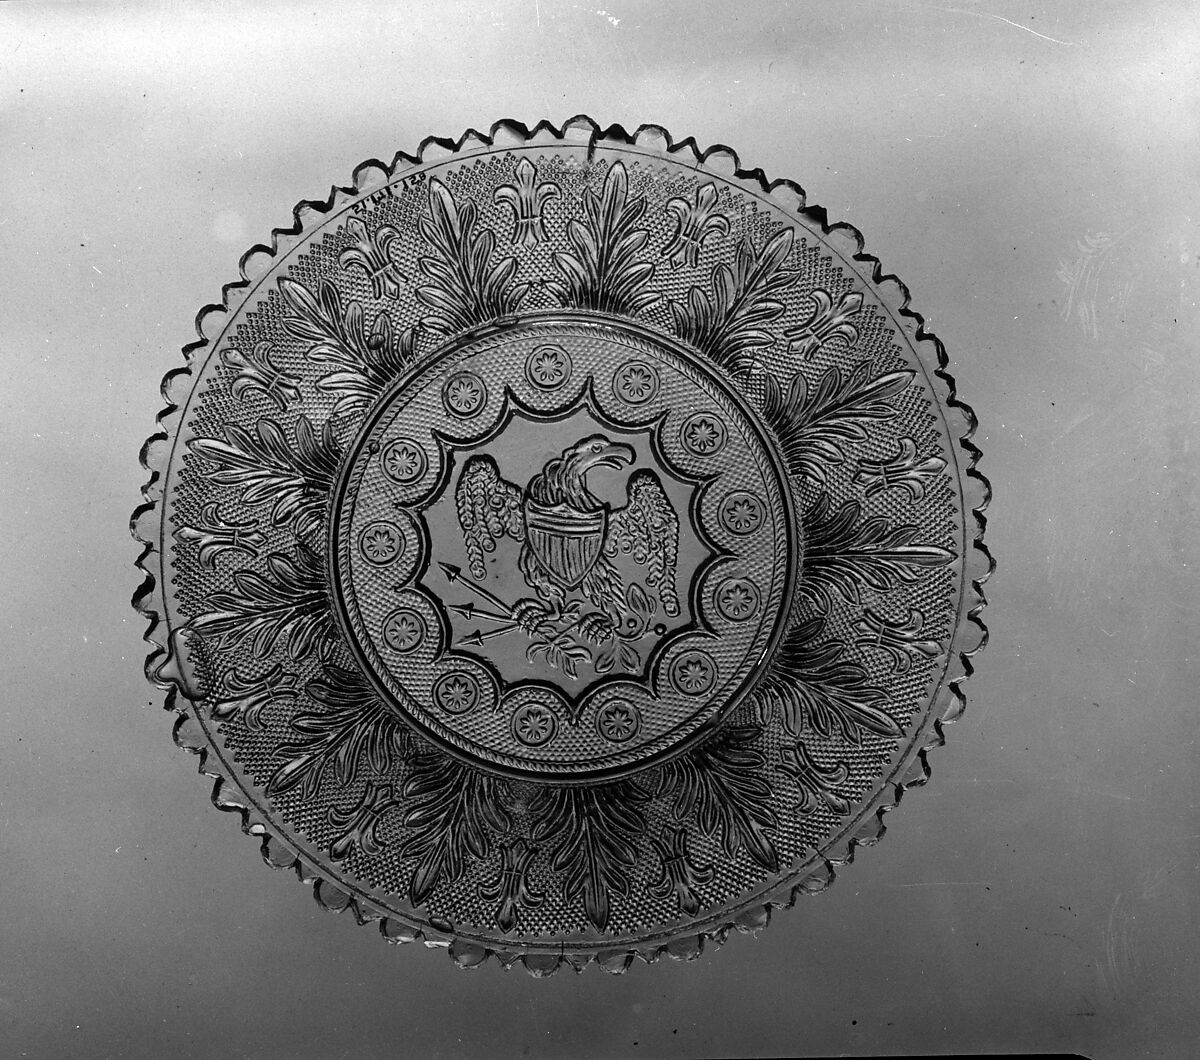 Plate, Lacy pressed glass, American 